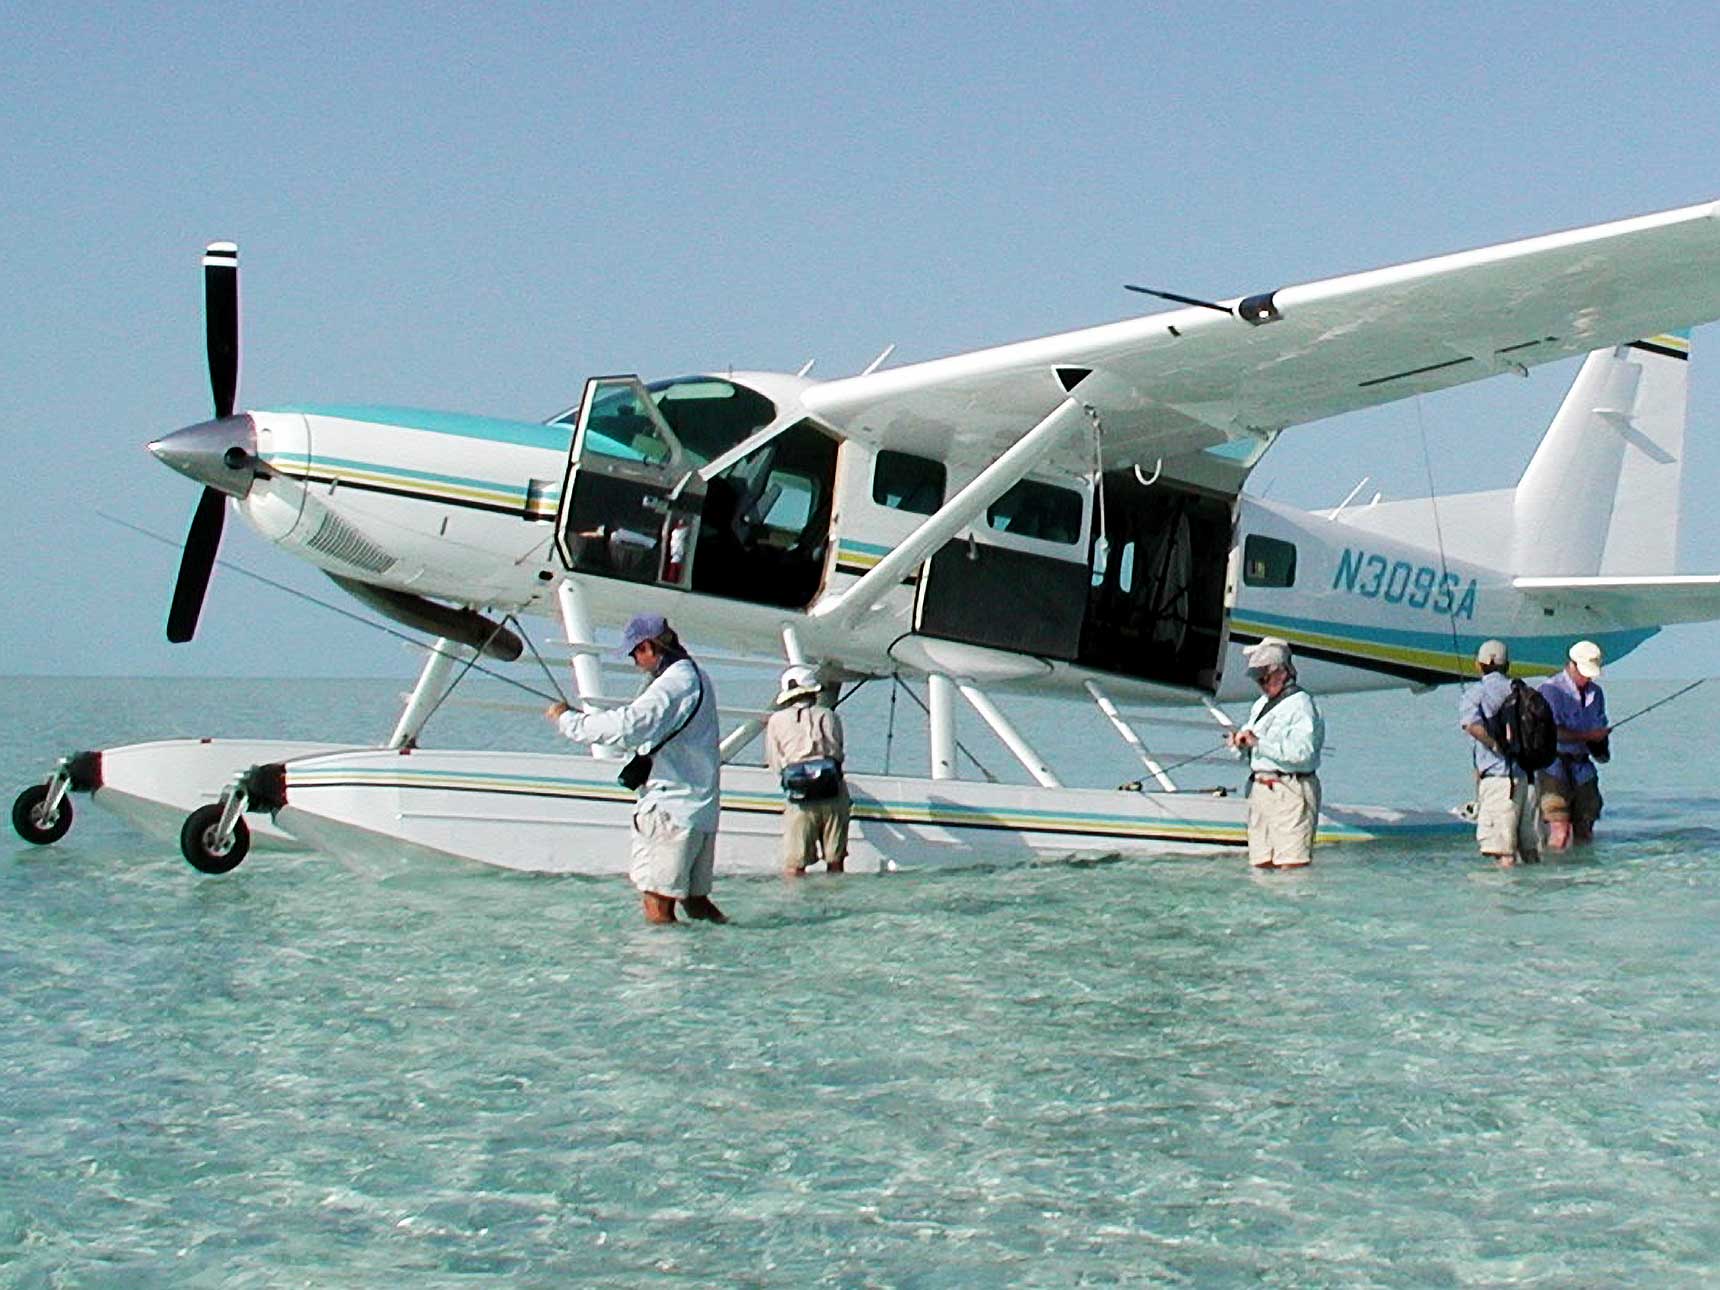 Shoreline Aviation Seaplane Charter Services to The Caribbean, The Bahamas, and New York/the Northeast